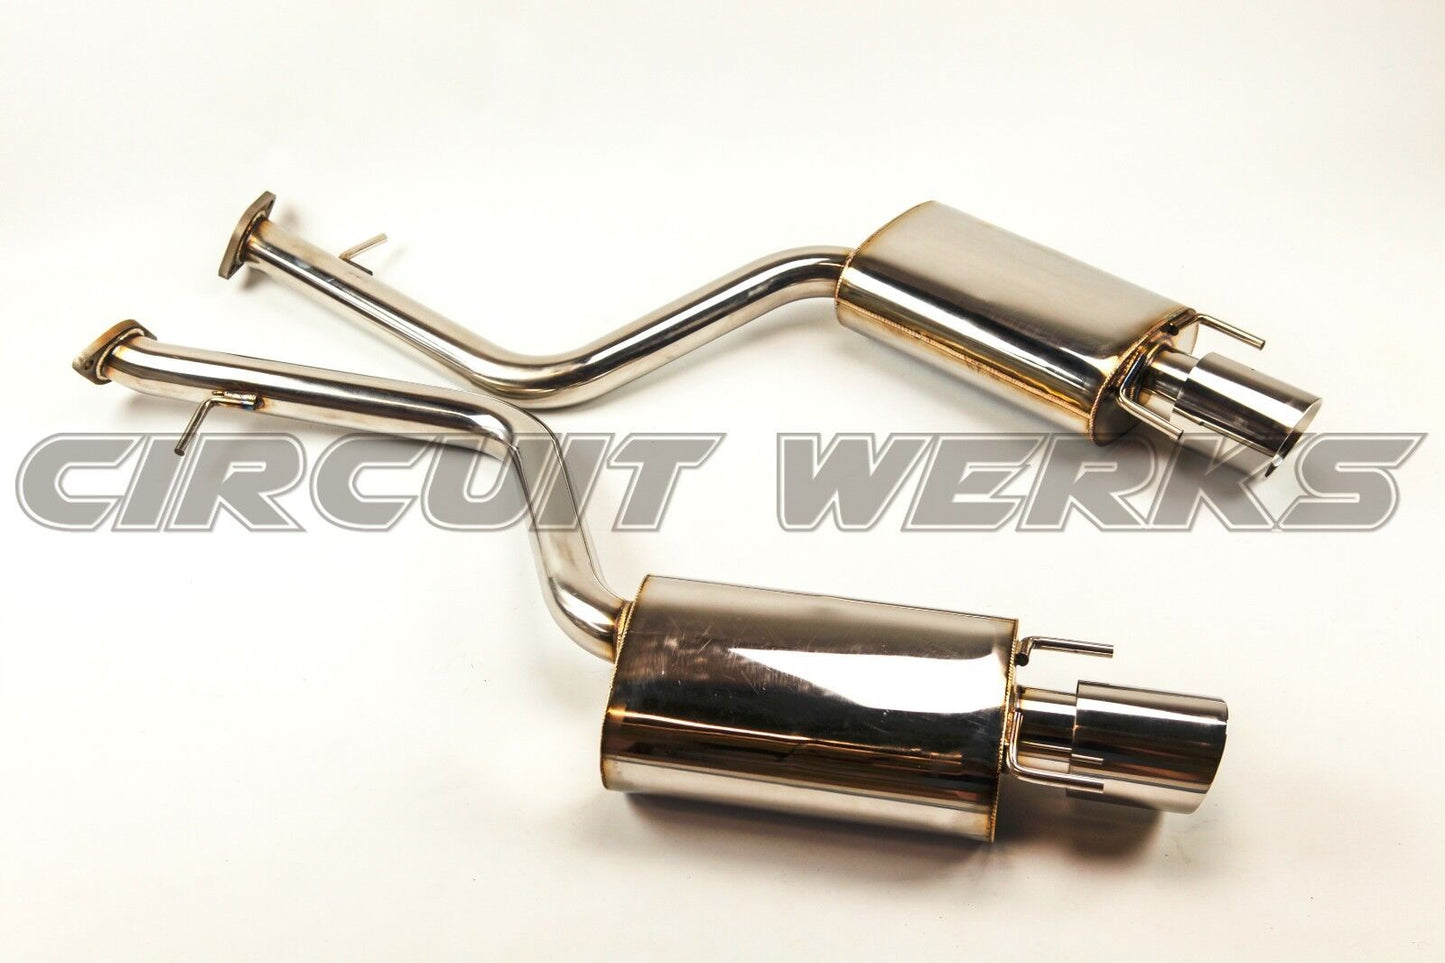 15+ RC350 RC200T RC300 RWD AWD F-sport Axle-Back Exhaust System Muffler w/ Tips